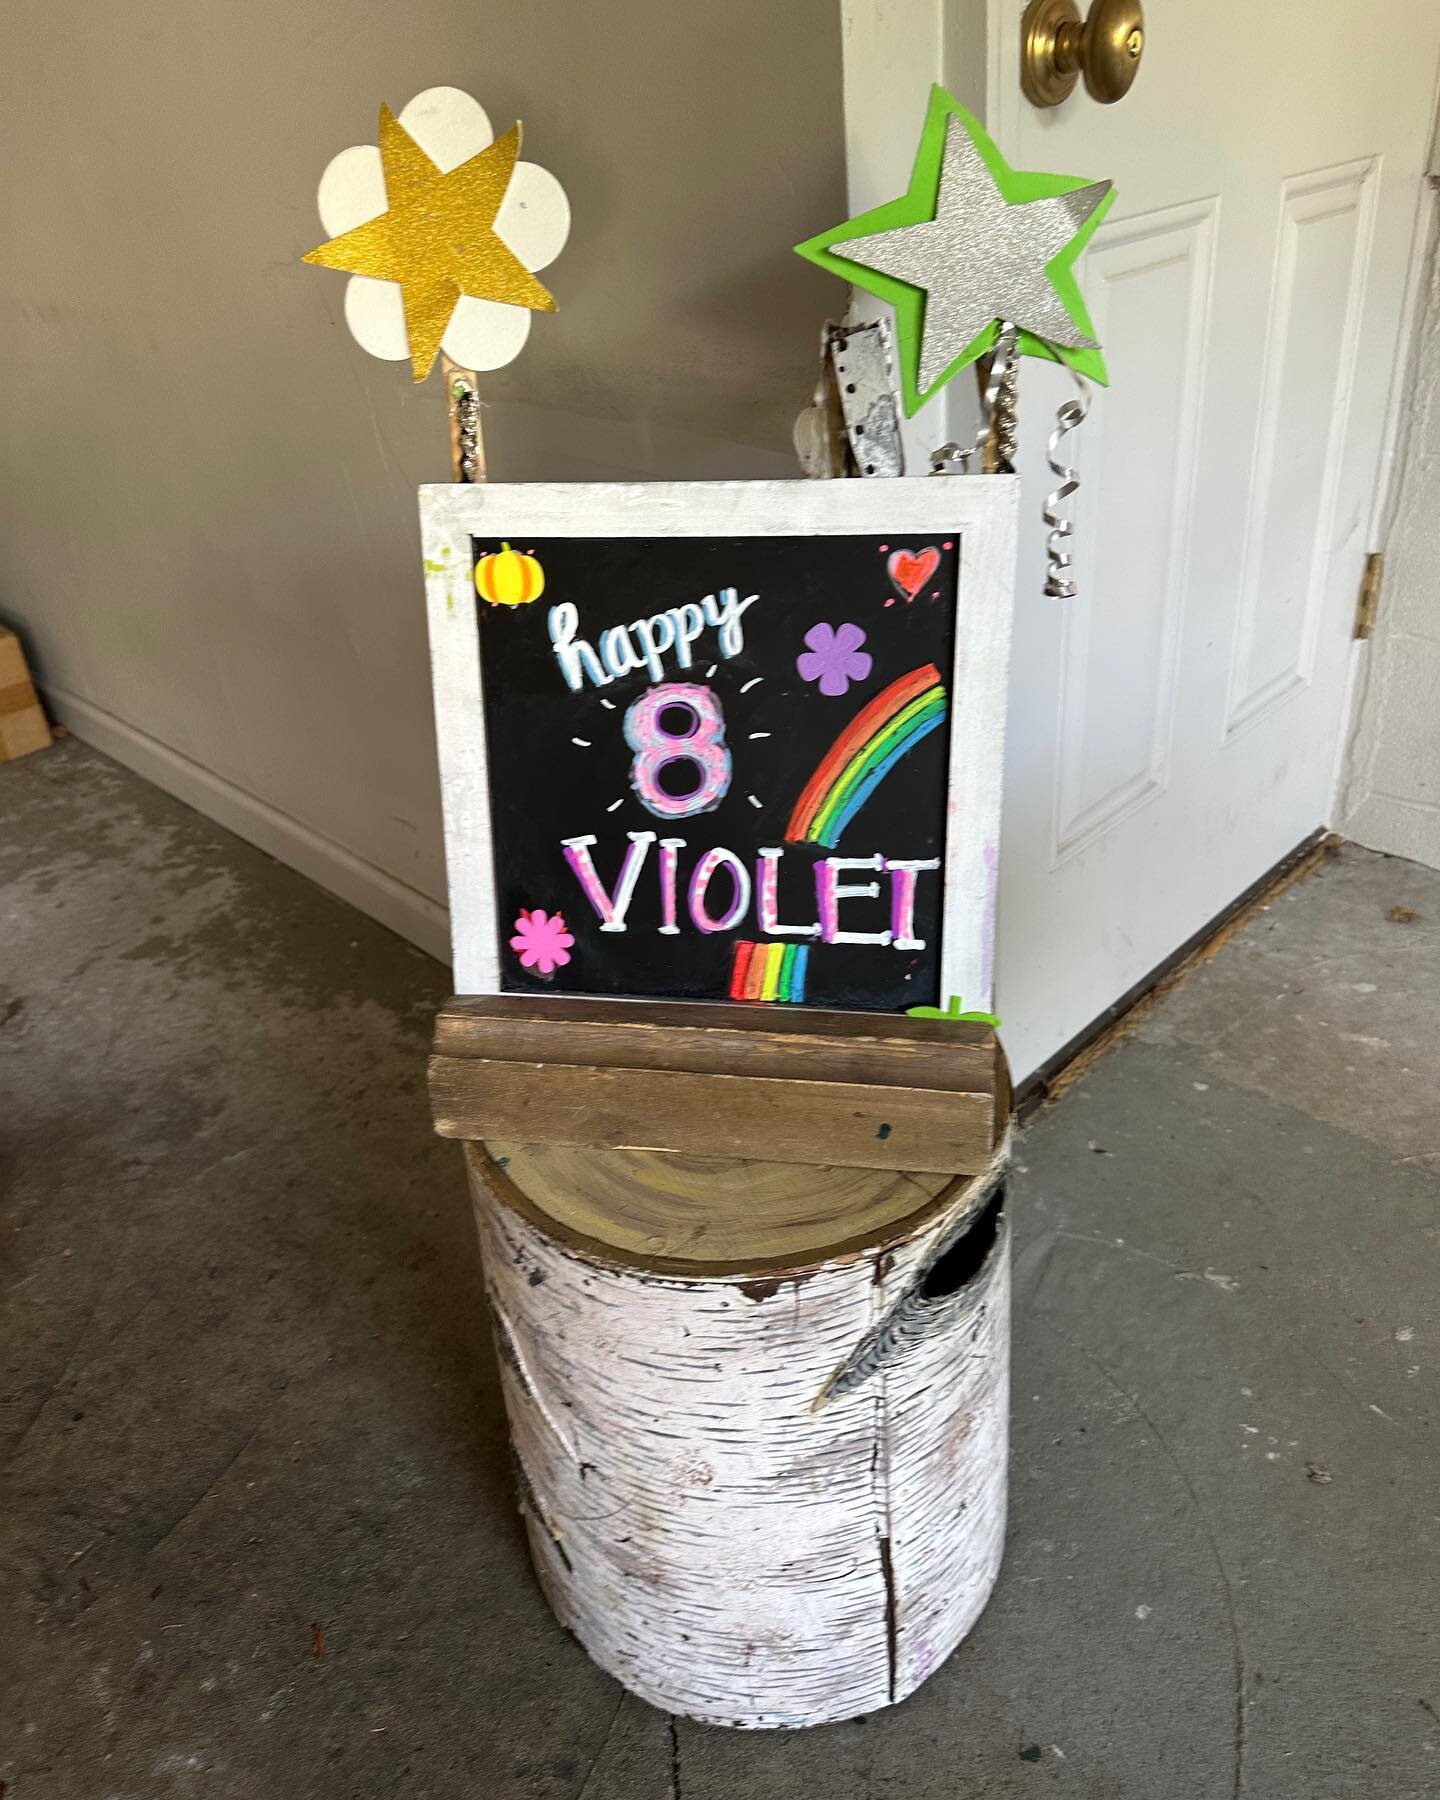 Tomorrow a big rainstorm is happening, so I set up the party tonight! HAPPY 🥳 BIRTHDAY-eve VIOLET!